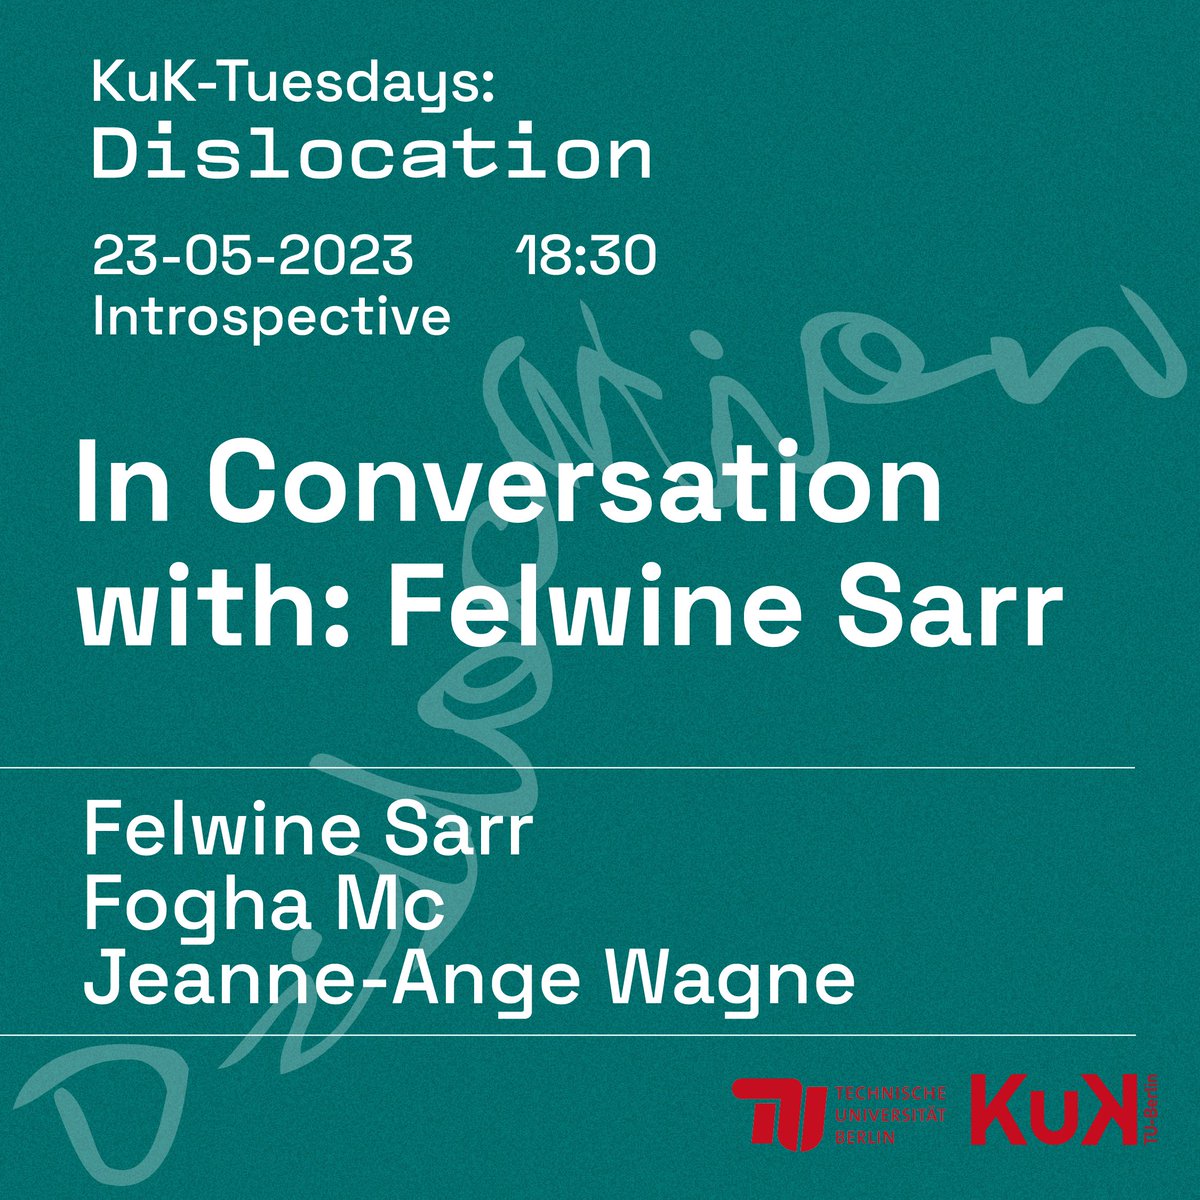 This Tuesday (23.5.), 18:30: 
Felwine Sarr (@FelwineSarr) in conversation with Jeanne-Ange Wagne and Fogha  Mc (@FoghaMc), part of our 'KuK-Tuesdays: Dislocation' series at the Hybrid Lab @TUBerlin 
Full program: tu.berlin/en/go145126/